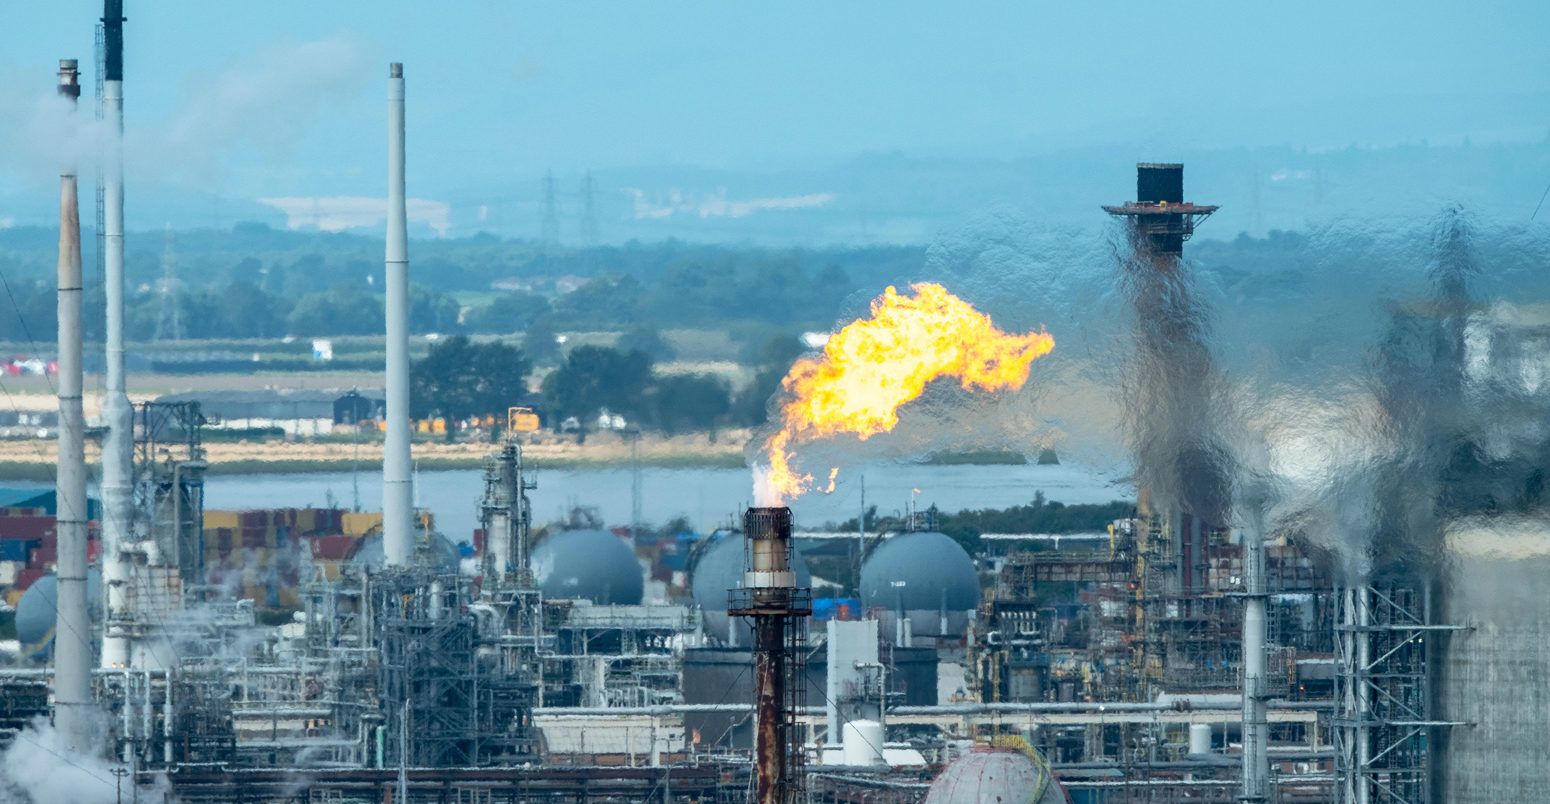 Methane emissions from fossil fuels 'severely underestimated' - Carbon Brief